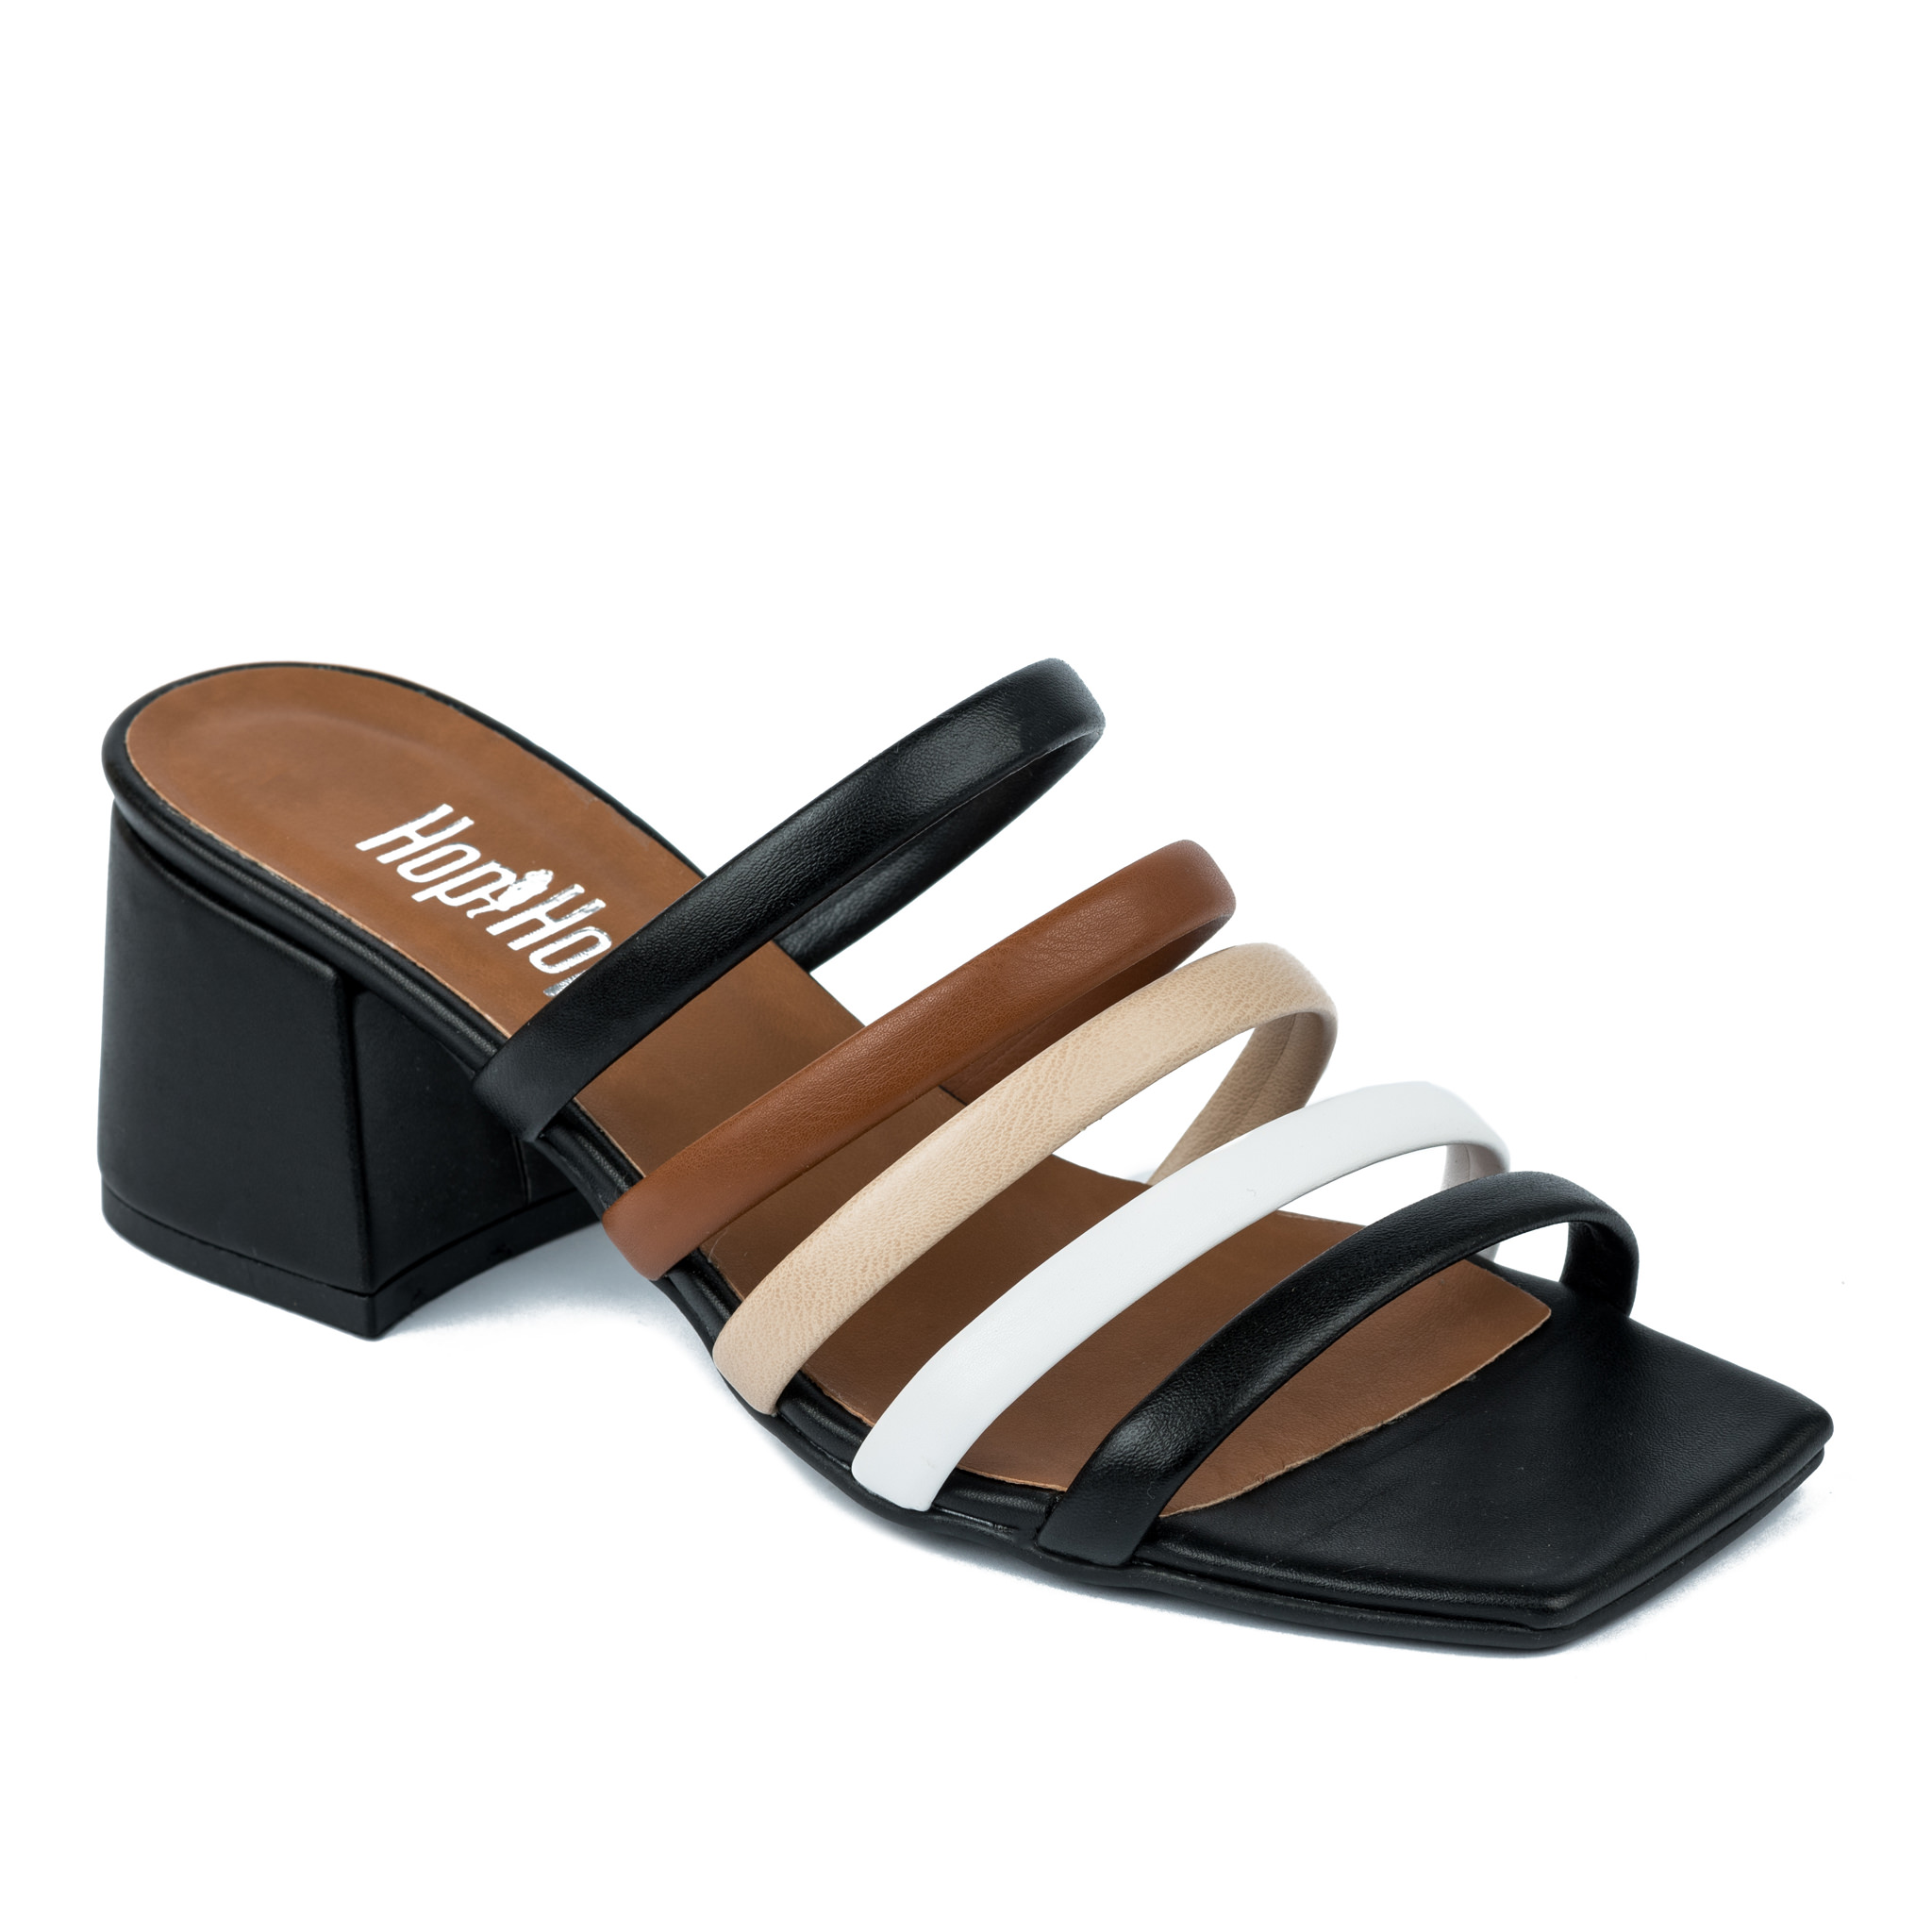 MULES WITH BLOCK HEEL AND BELTS - BLACK